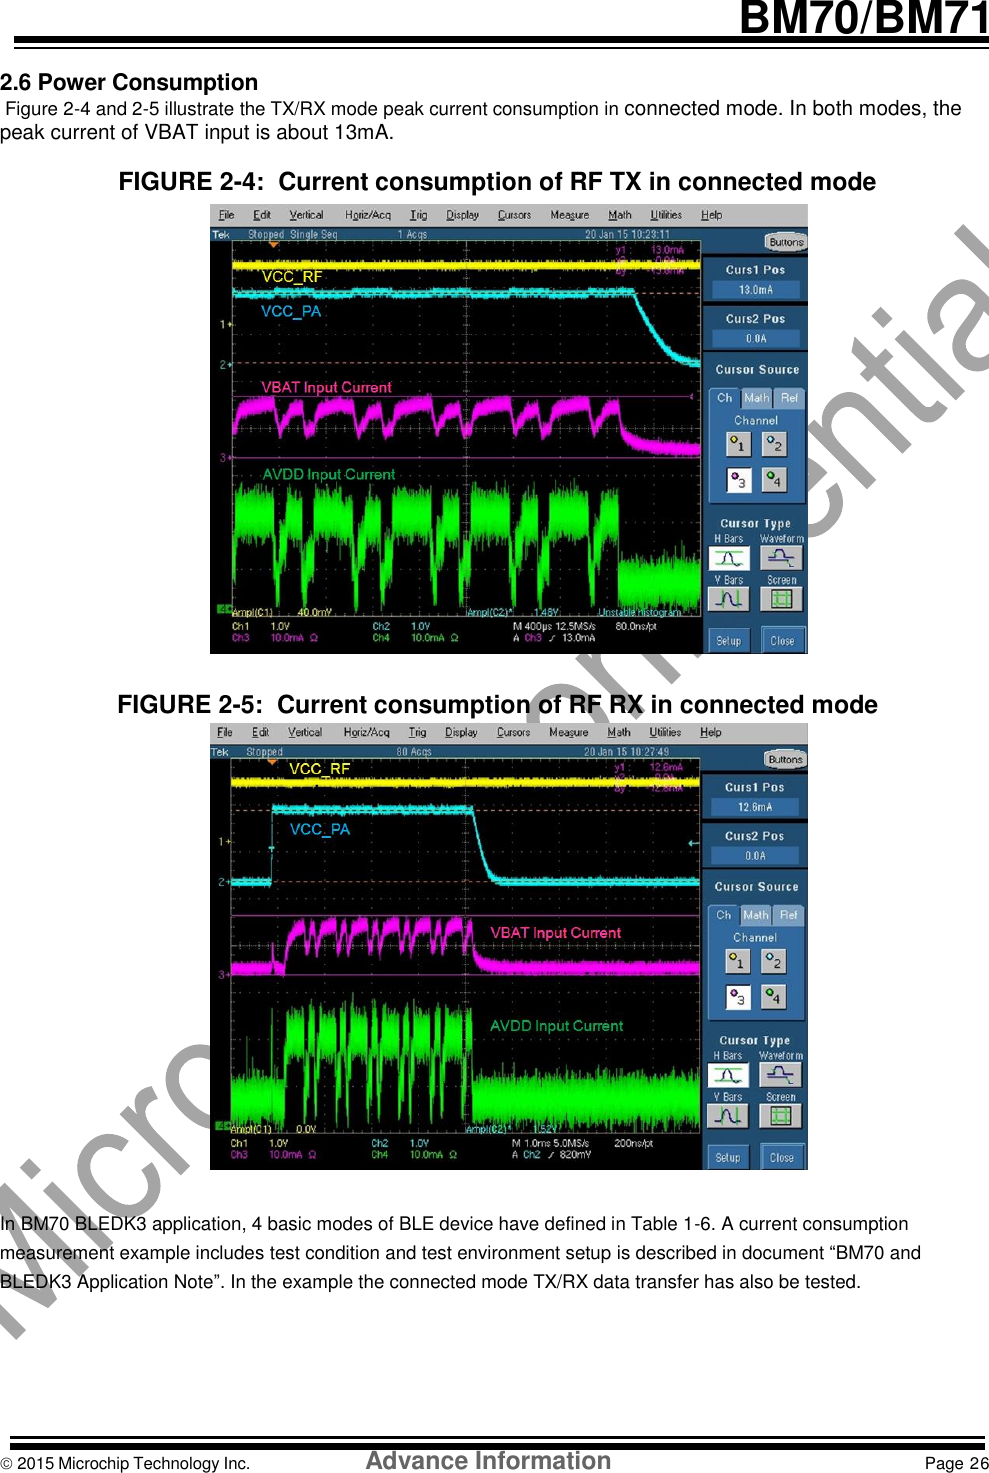   BM70/BM71  2.6 Power Consumption    Figure 2-4 and 2-5 illustrate the TX/RX mode peak current consumption in connected mode. In both modes, the peak current of VBAT input is about 13mA.  FIGURE 2-4:  Current consumption of RF TX in connected mode                     FIGURE 2-5:  Current consumption of RF RX in connected mode                 In BM70 BLEDK3 application, 4 basic modes of BLE device have defined in Table 1-6. A current consumption measurement example includes test condition and test environment setup is described in document “BM70 and BLEDK3 Application Note”. In the example the connected mode TX/RX data transfer has also be tested.       2015 Microchip Technology Inc.                Advance Information                                      Page 26    